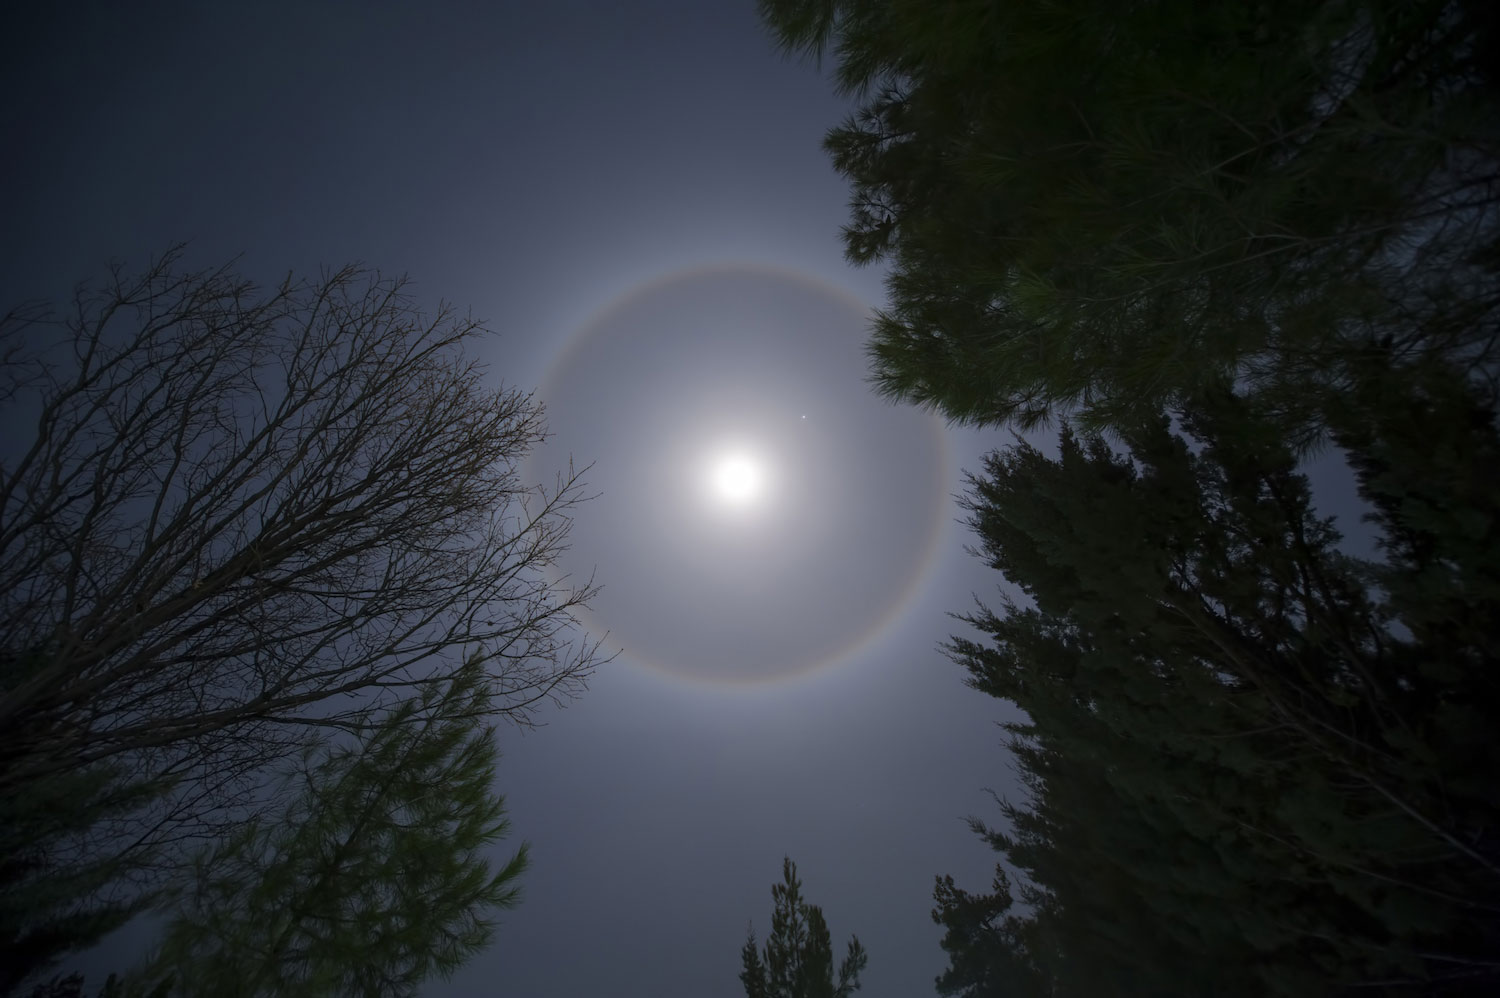 The full moon with a halo around it.